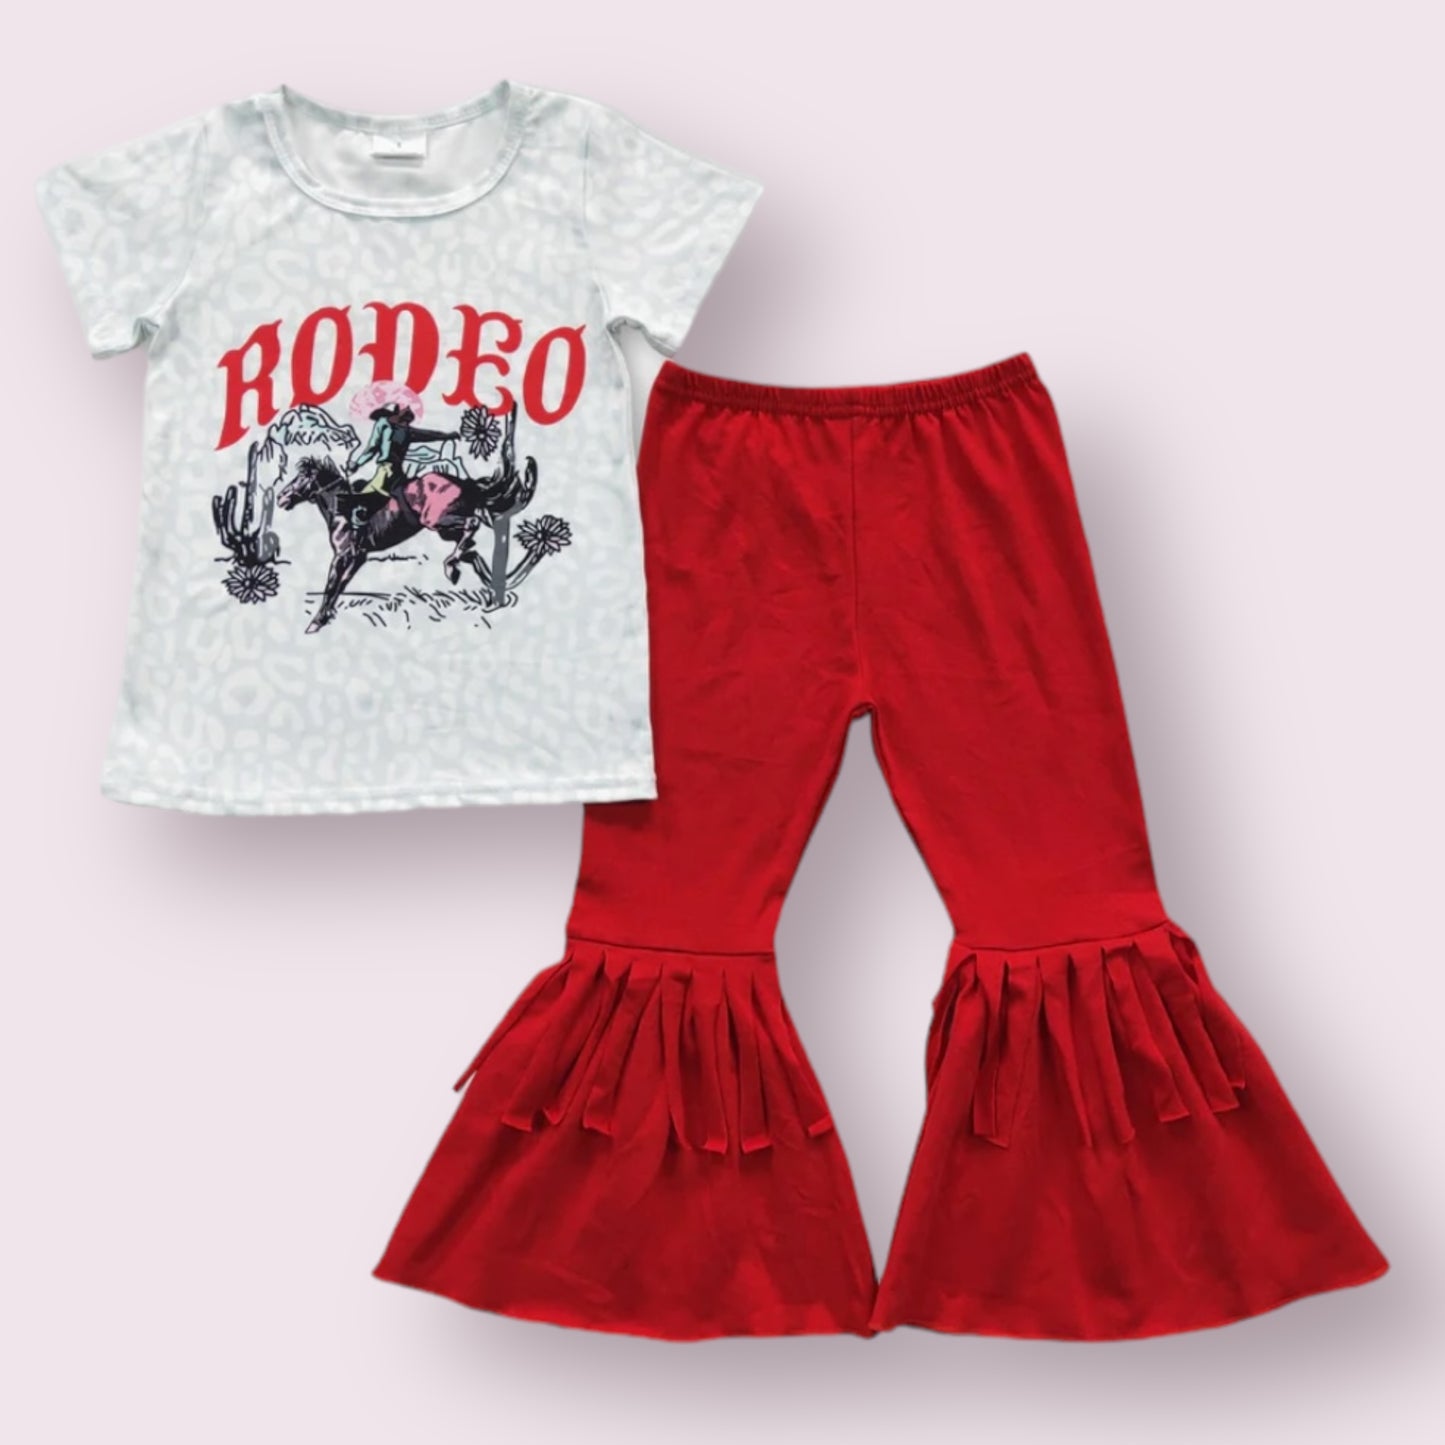 Rodeo and Fringe Bell Pant set